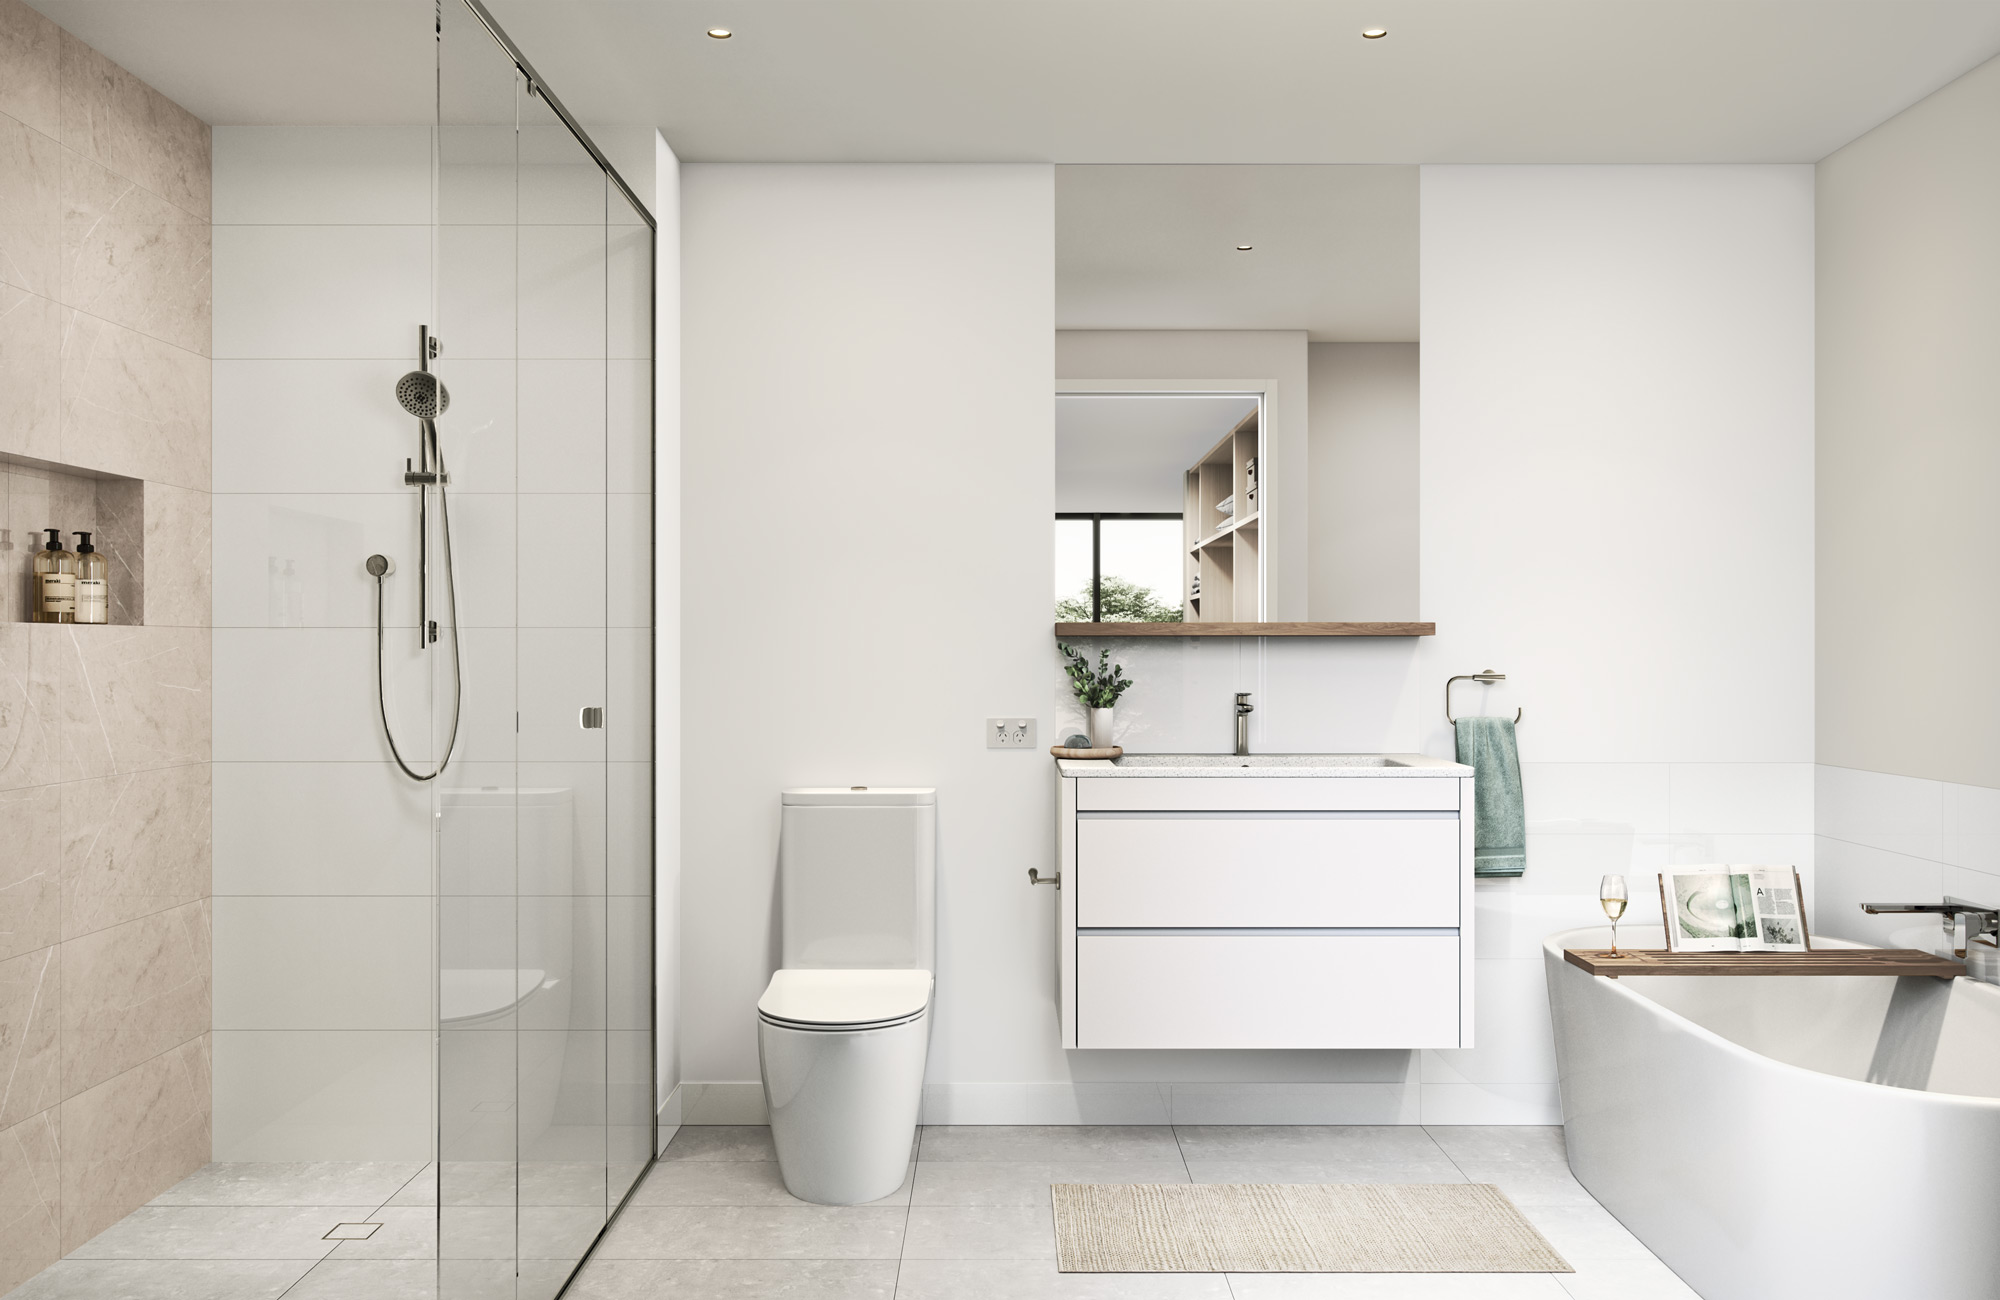 Modern bathroom finished with a white colour pallet